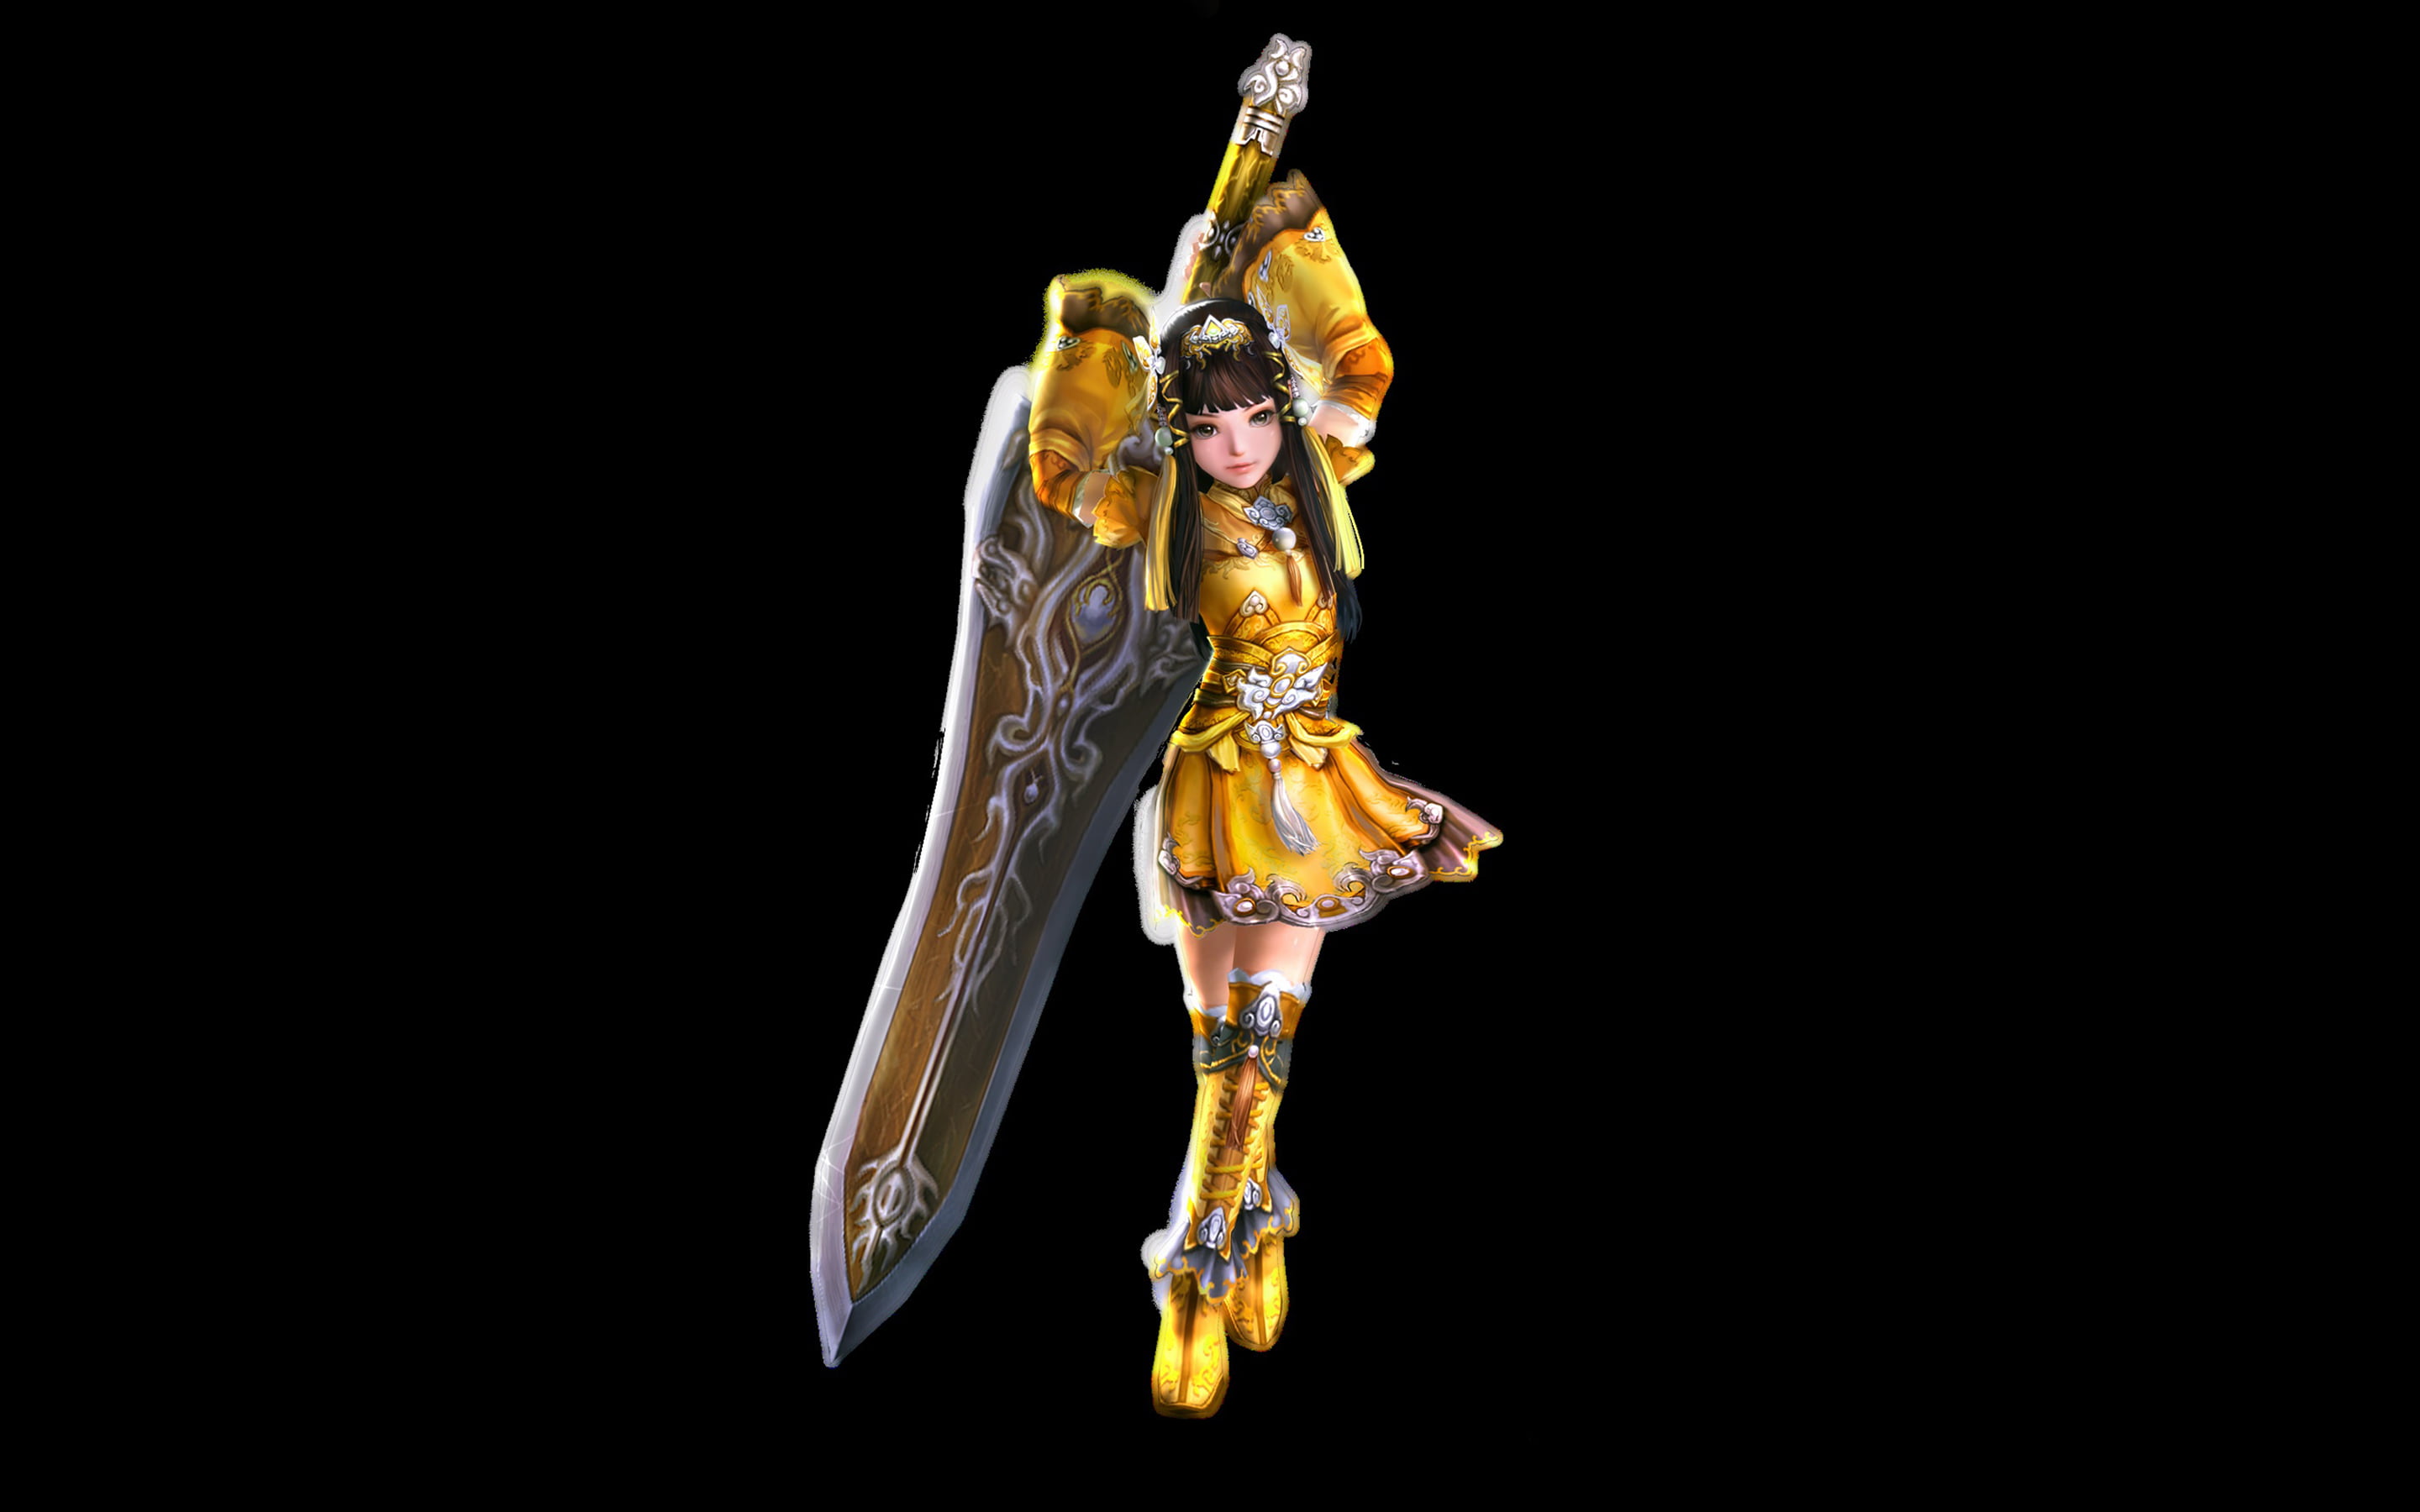 Lori Japanese Fighter Girl Traditional Yellow Clothes Weapon Large Sword Topic Of Video Game Wallpaper Widescreen Hd